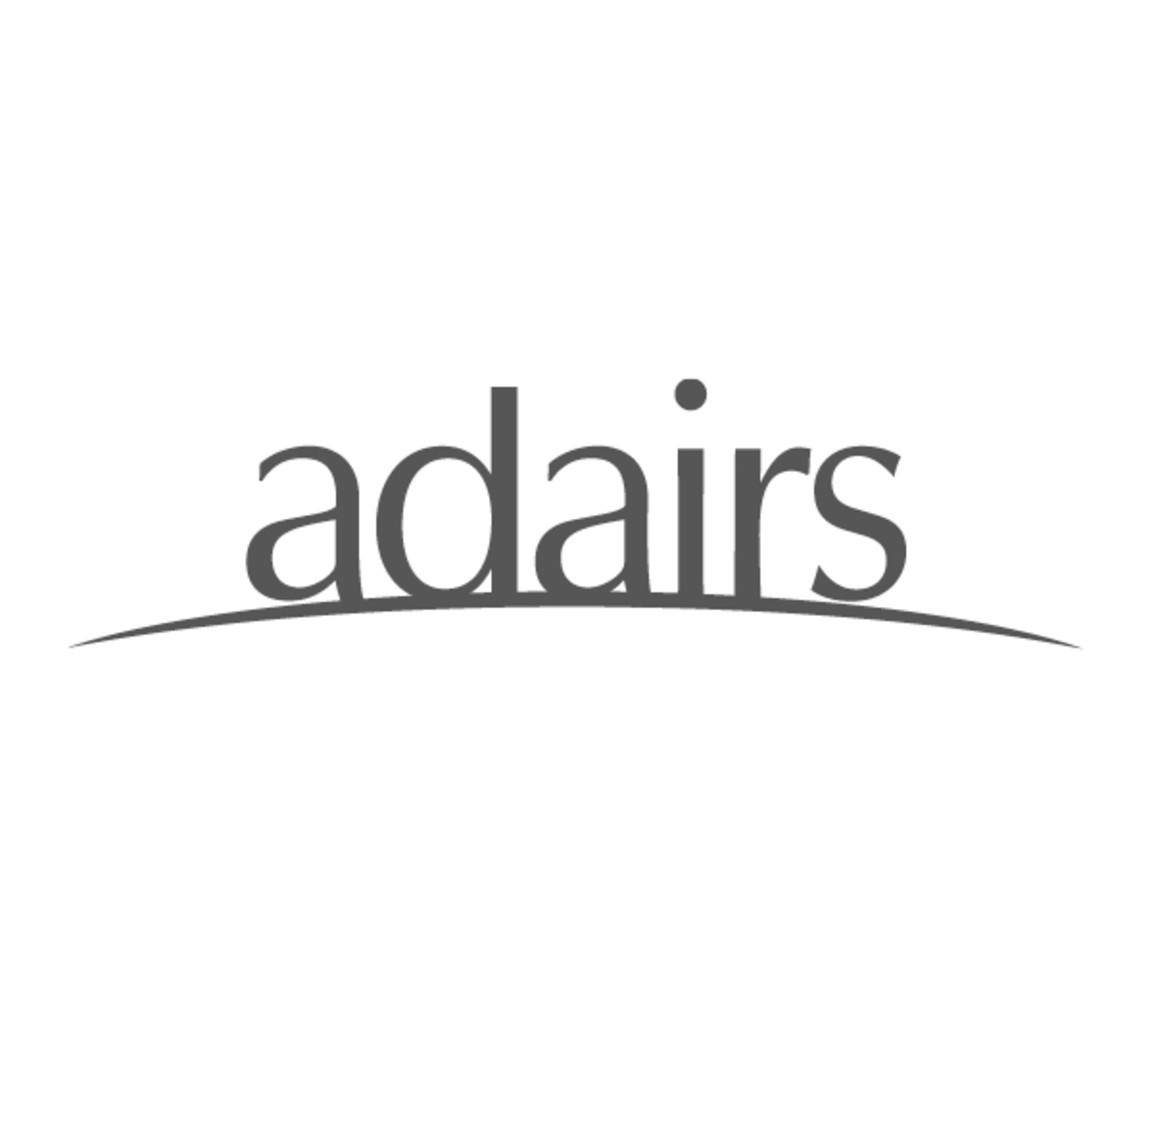 Adairs Share Price up on Strong Earnings (ASX:ADH)